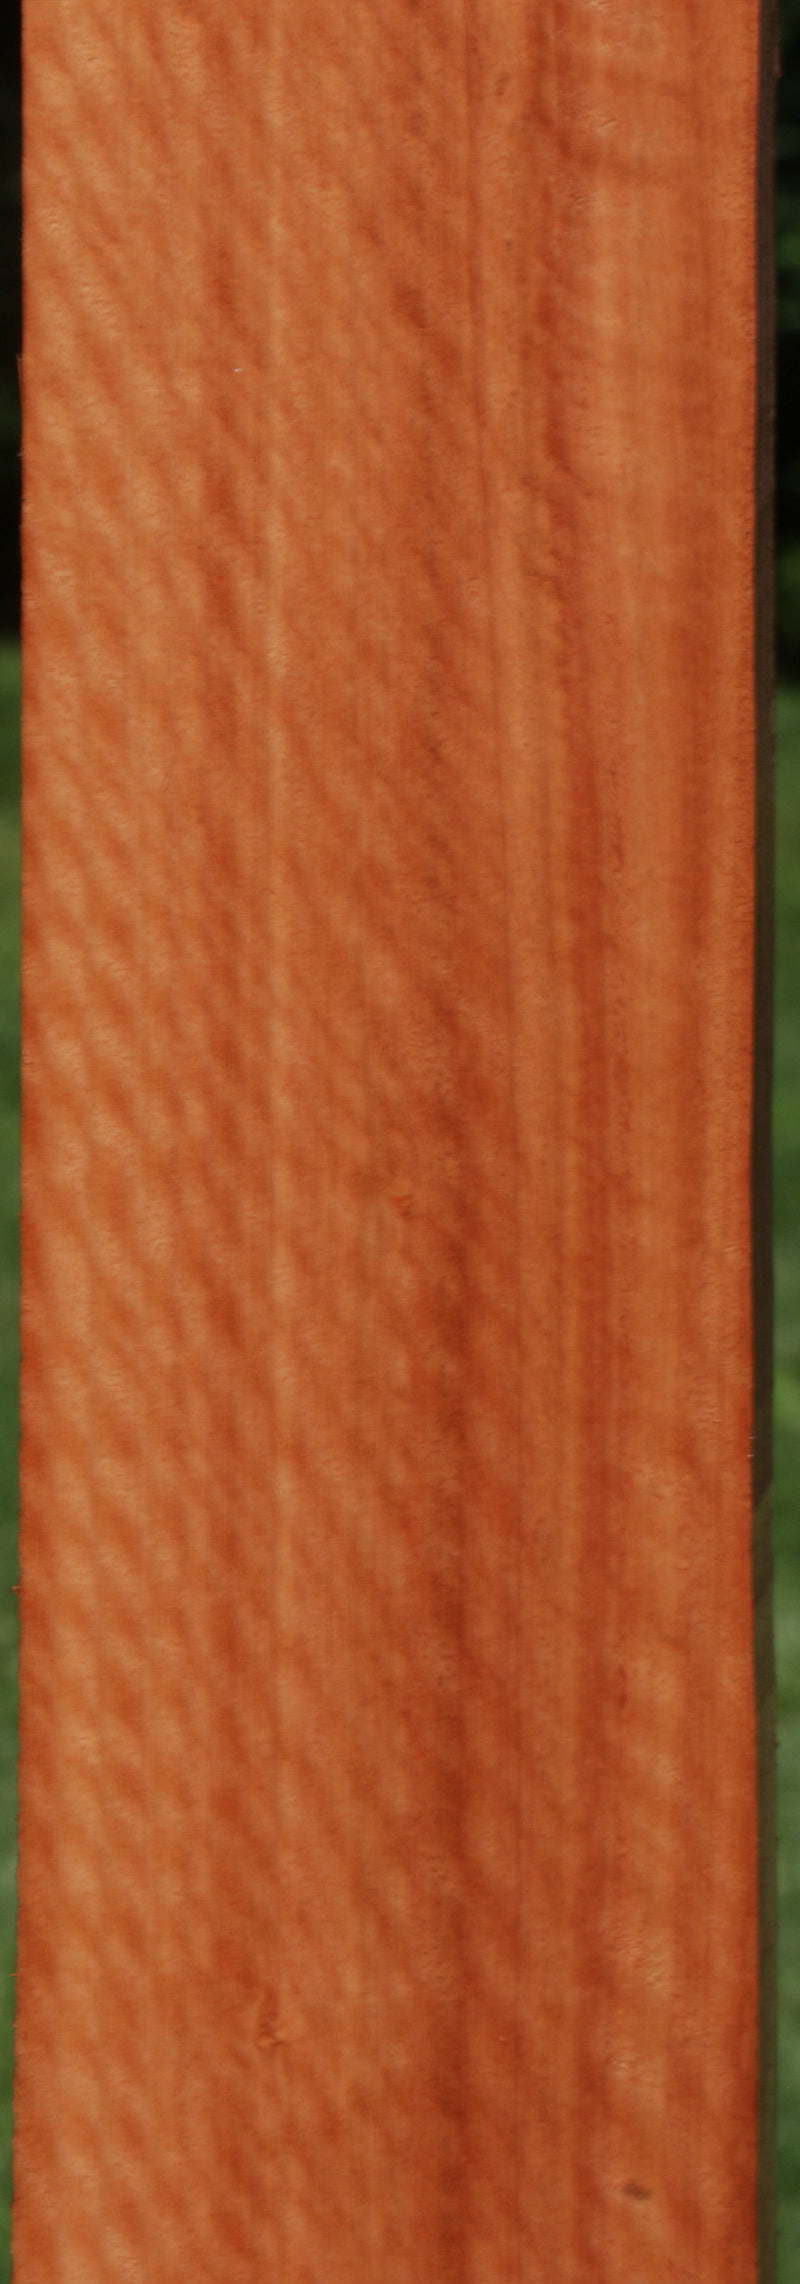 Extra Fancy Red Gum Lumber